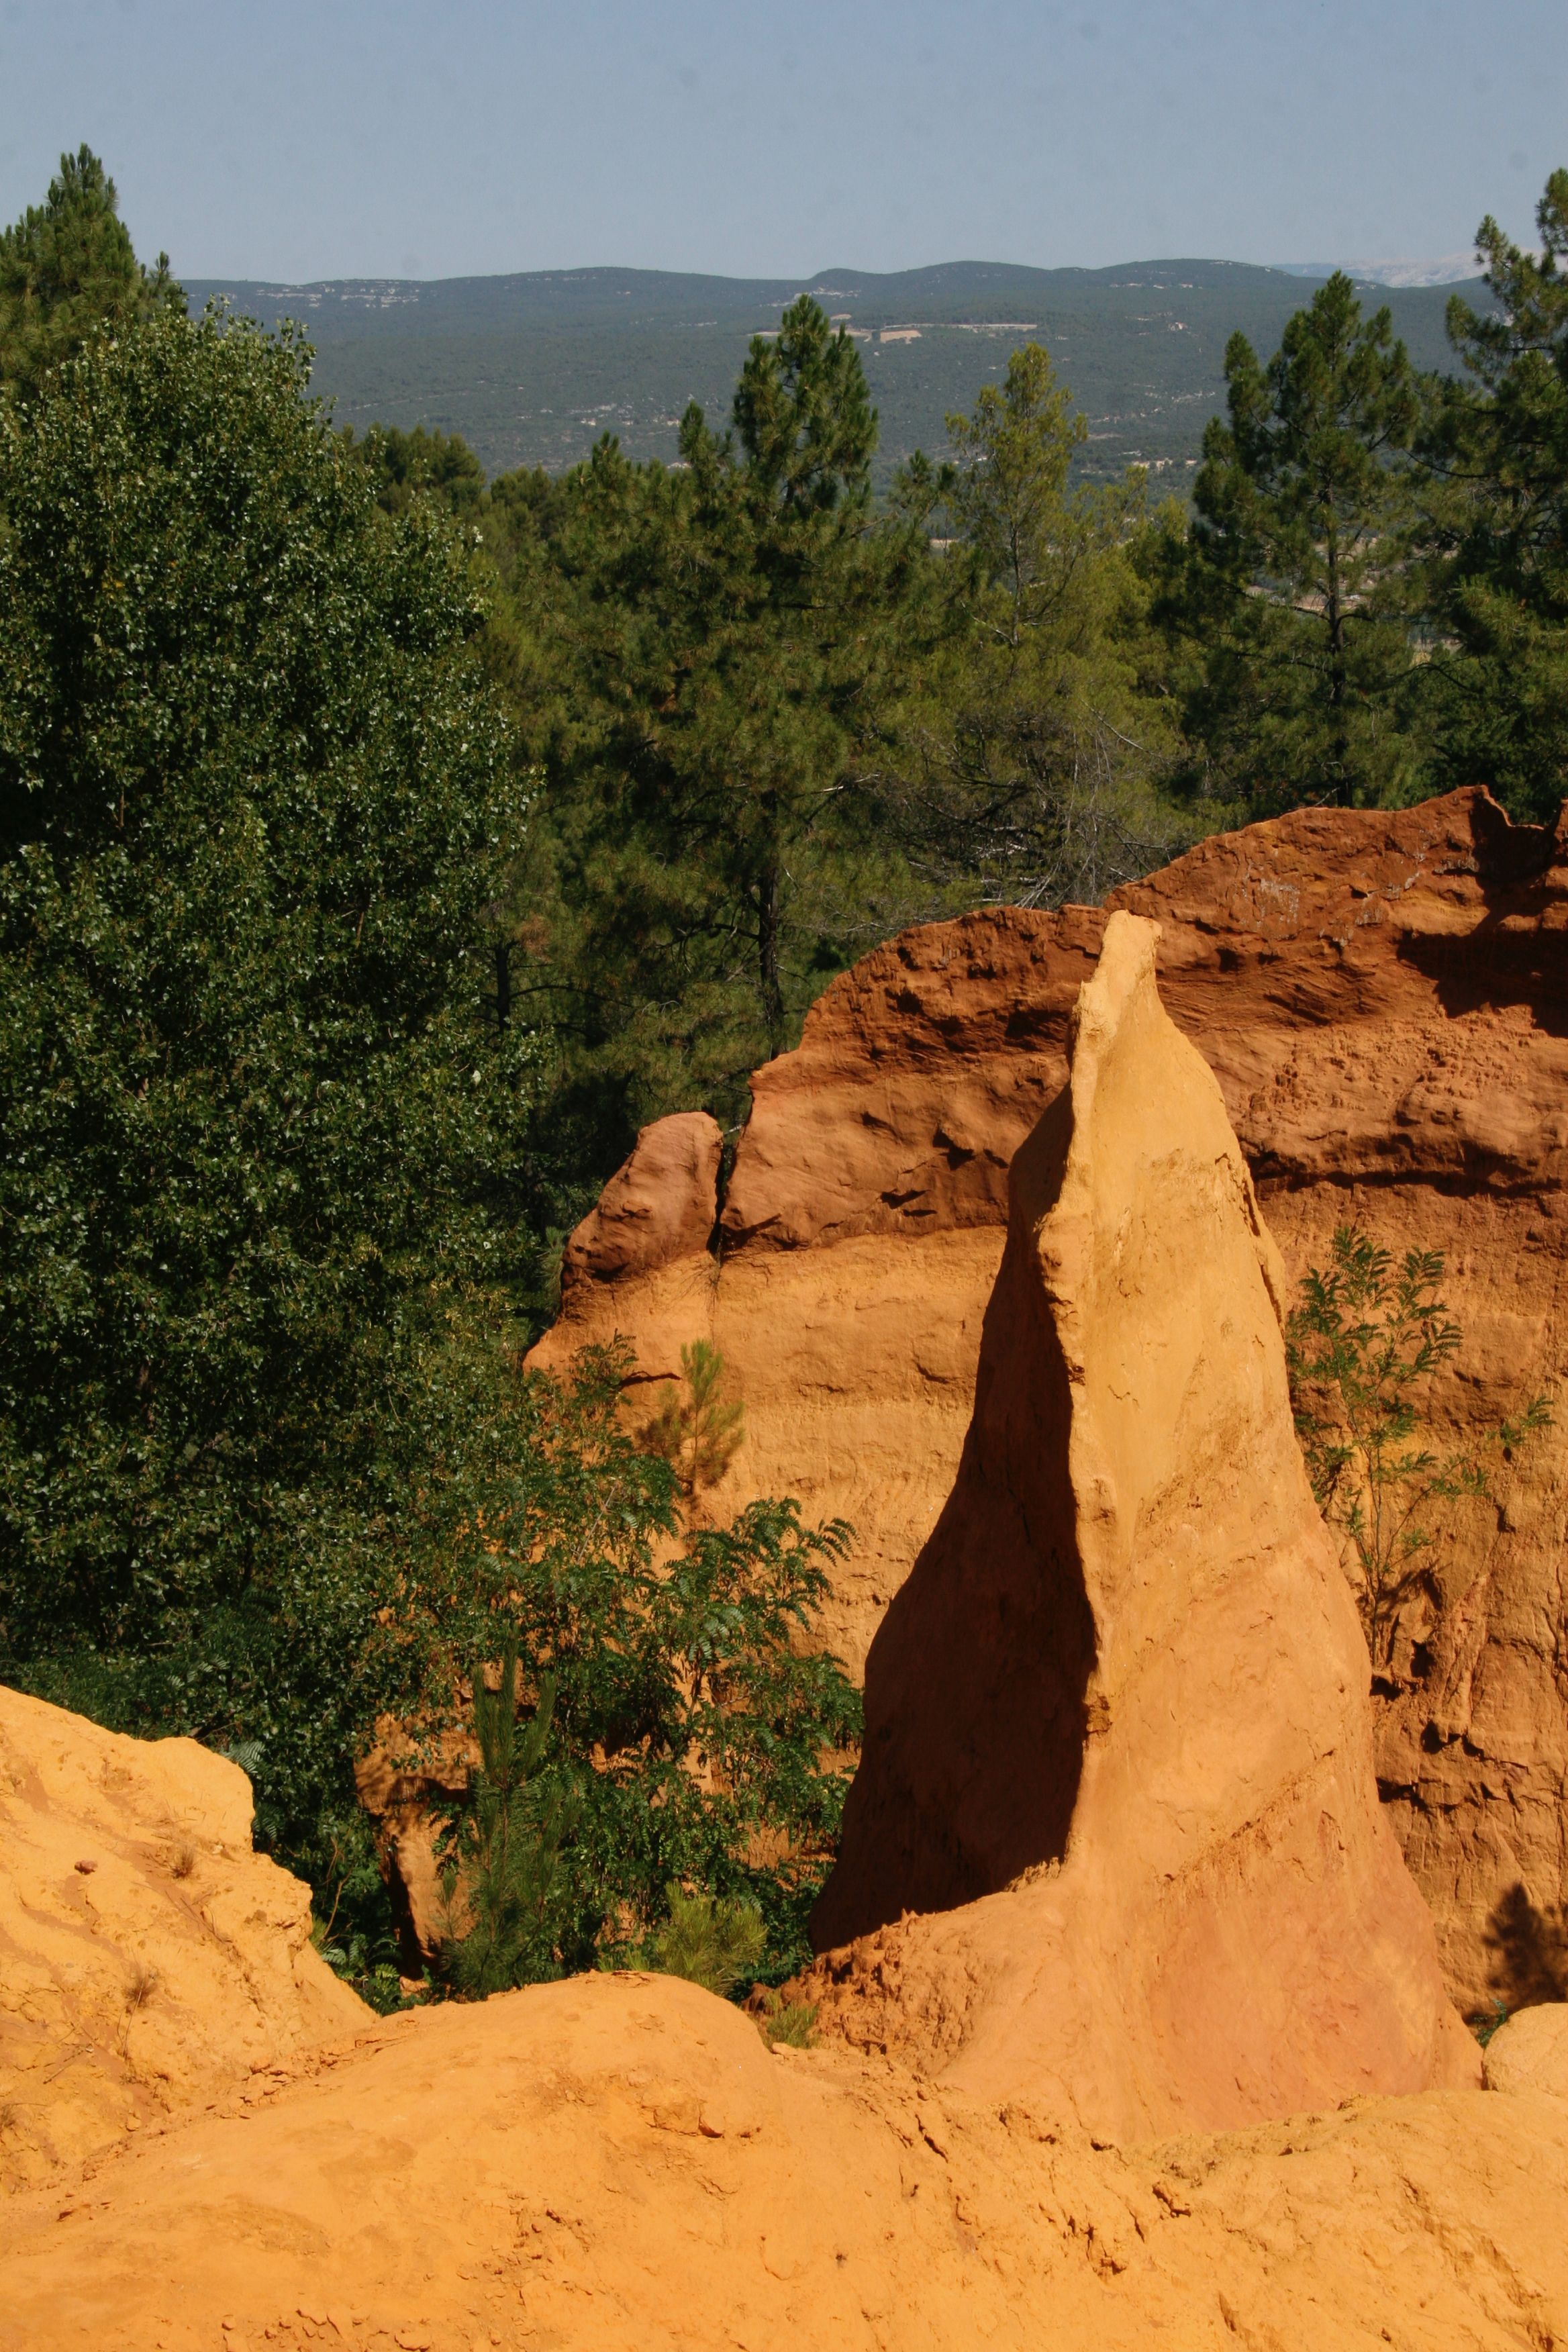 Right; view of the ochre pits, Roussillon, Provence, France.